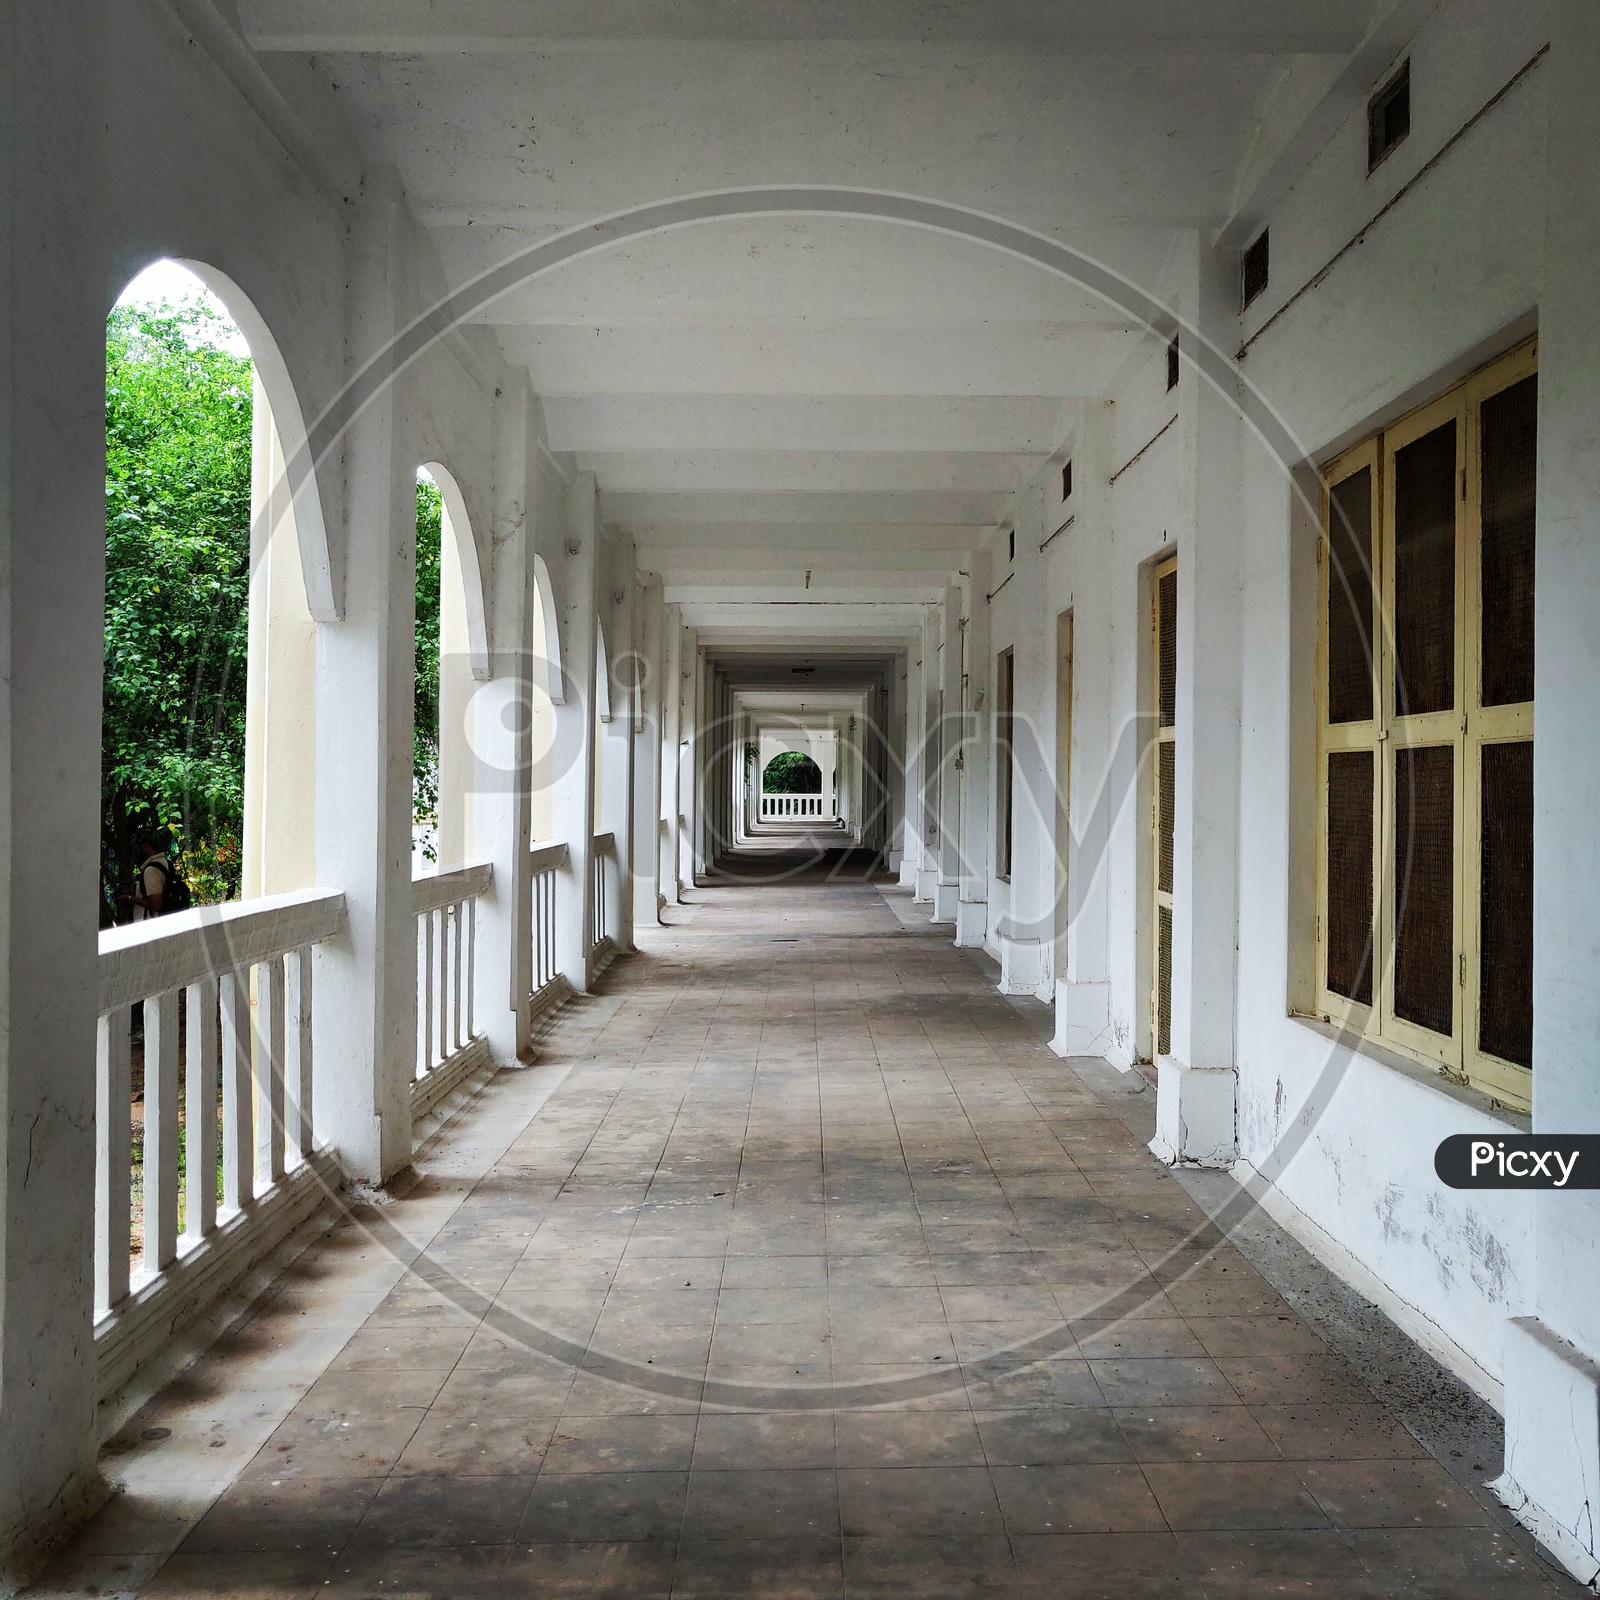 Architecture Of a Balcony Hall With Windows And Pillars